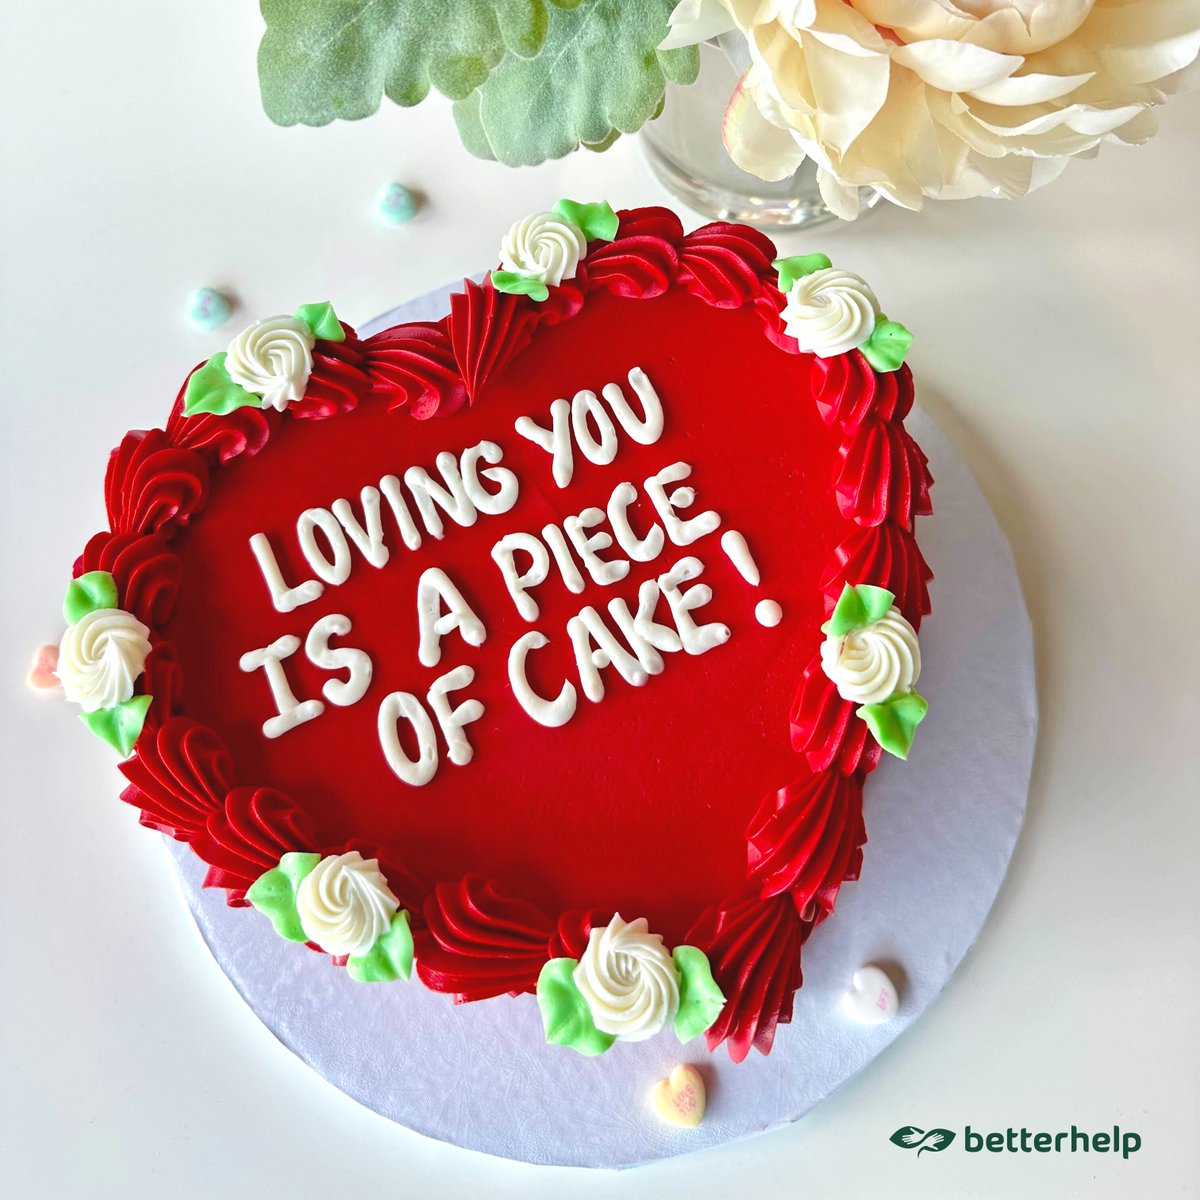 Happy Valentine’s Day! Today’s the day to show the important people in your life how much you love them (including yourself) <3 Tag someone in the comments to spread the love!